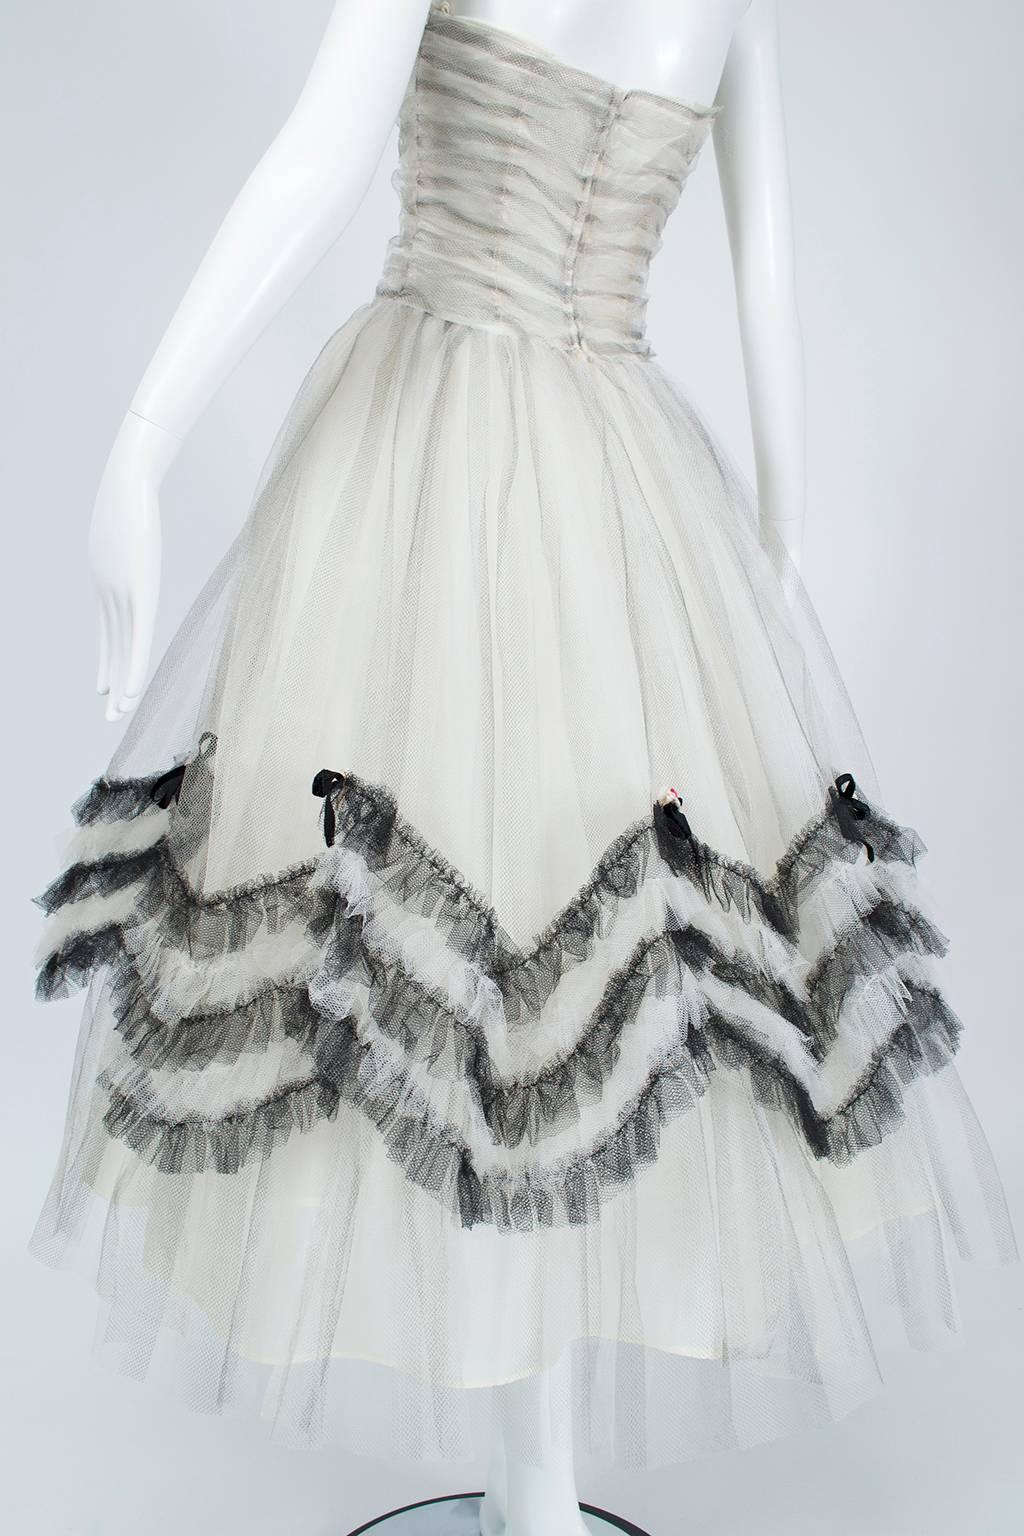 Gray Parlsienne Coquette New Look Strapless Black White Tulle Party Dress - S, 1950s For Sale